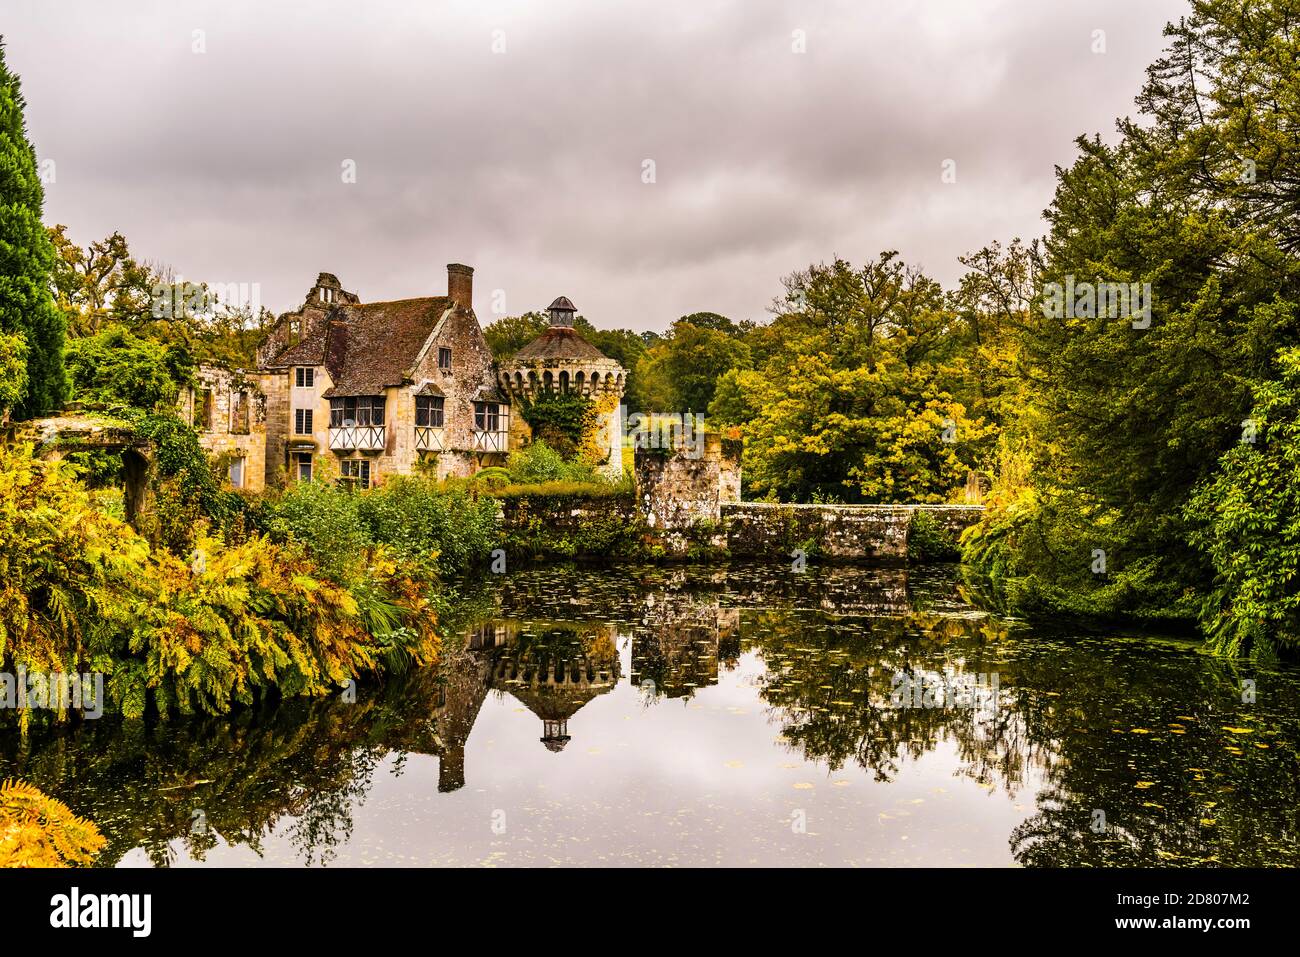 Reflections in the moat of the old castle at Scotney Castle, Kent, UK Stock Photo